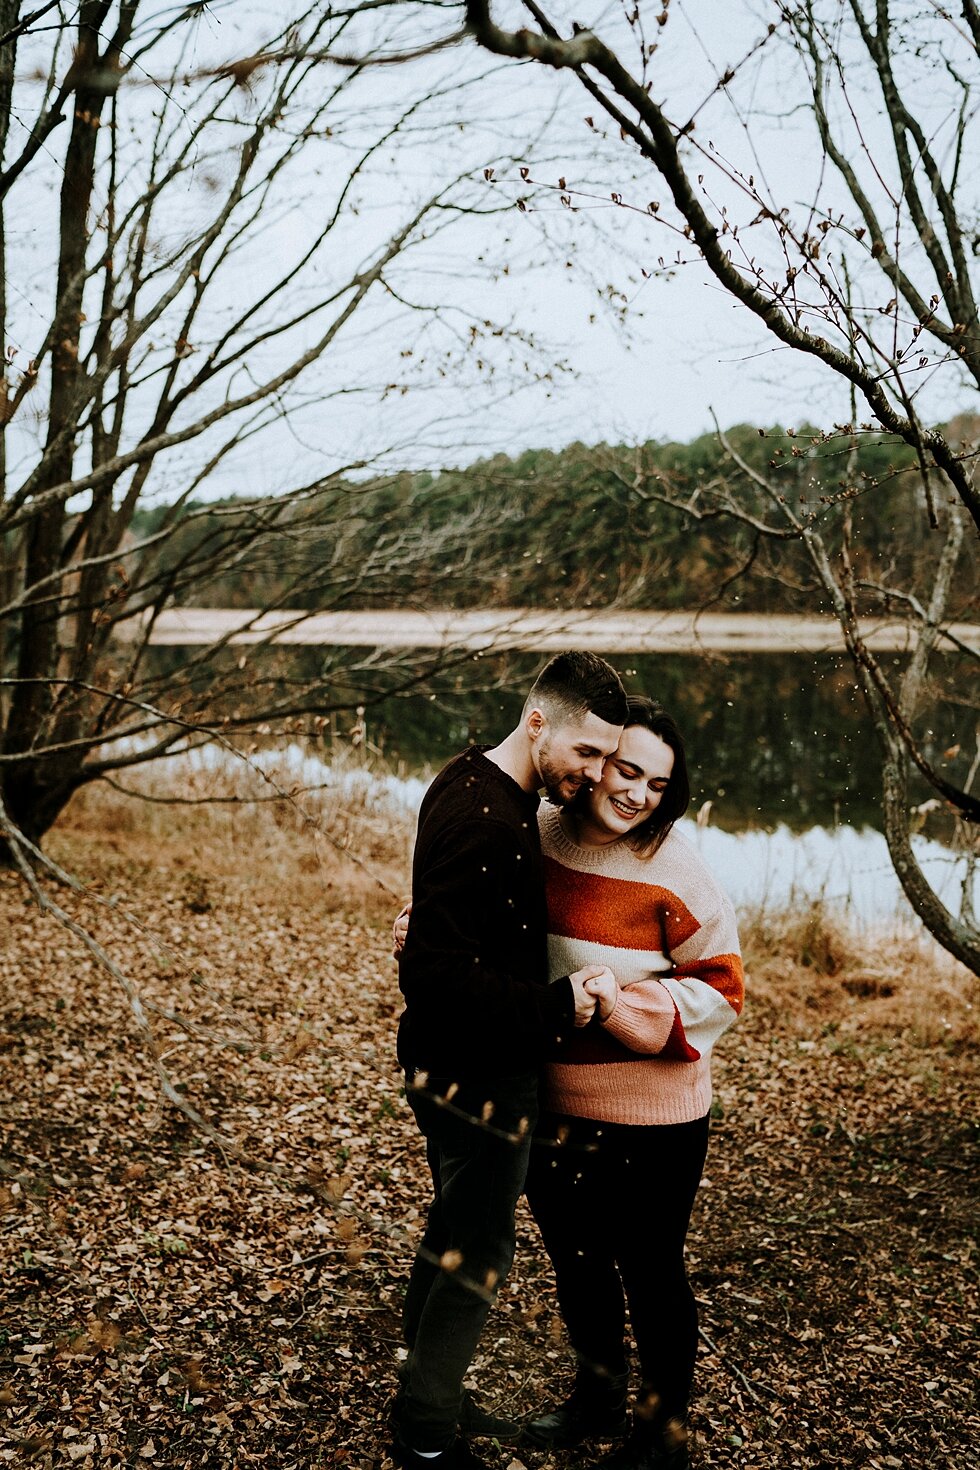  Engagement photo inspiration for outfits that really pop in front of a dynamic background during fall. #engagementgoals #engagementphotographer #engaged #outdoorengagement #kentuckyphotographer #indianaphotographer #louisvillephotographer #engagemen